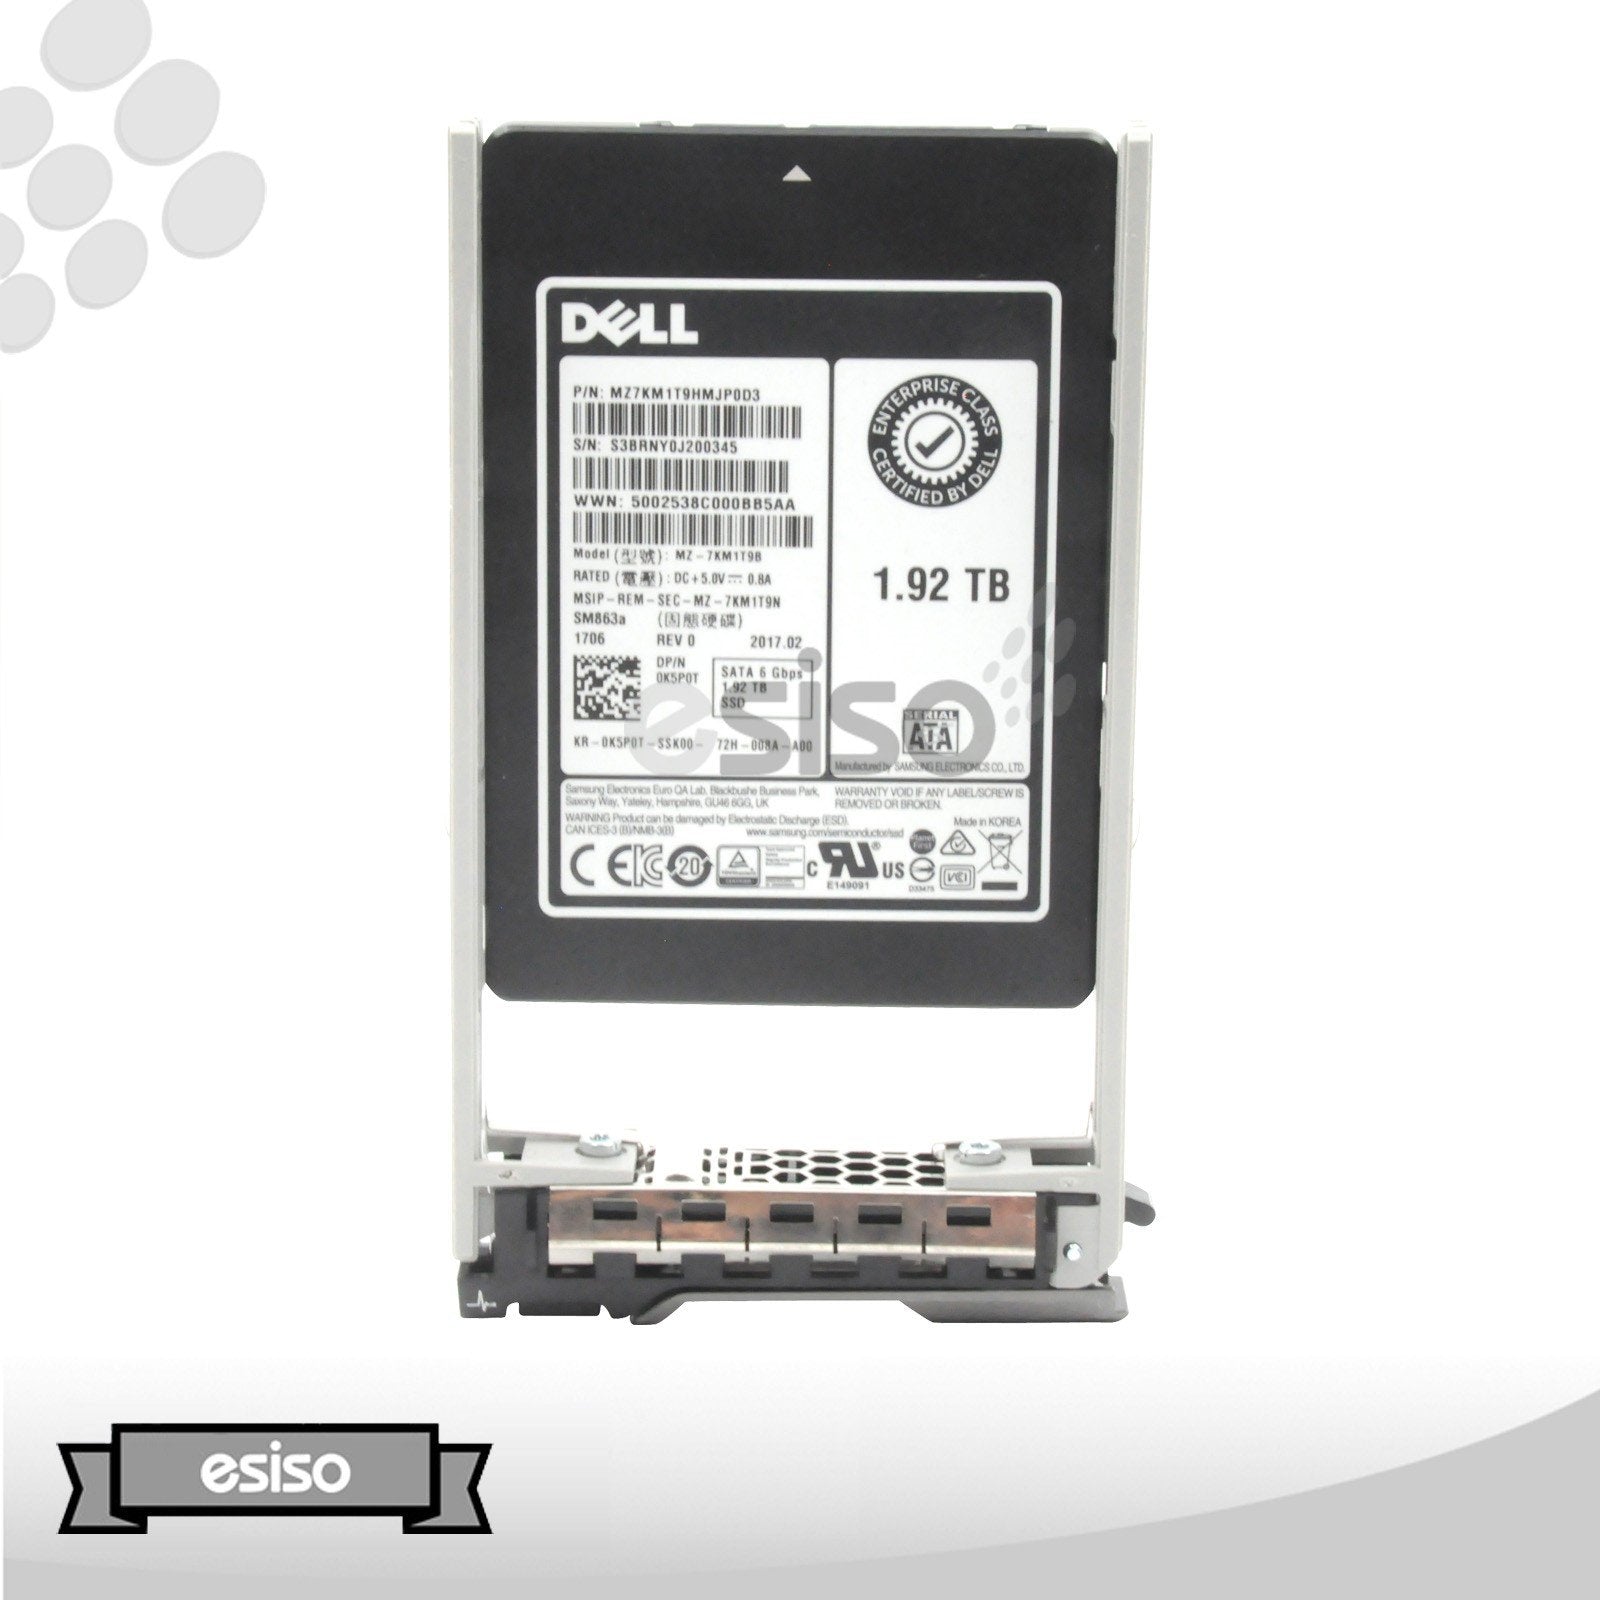 K5P0T 0K5P0T MZ-7KM1T9B SM863A DELL 1.92TB 6G SFF 2.5'' SATA MU SOLID STATE DRIVE